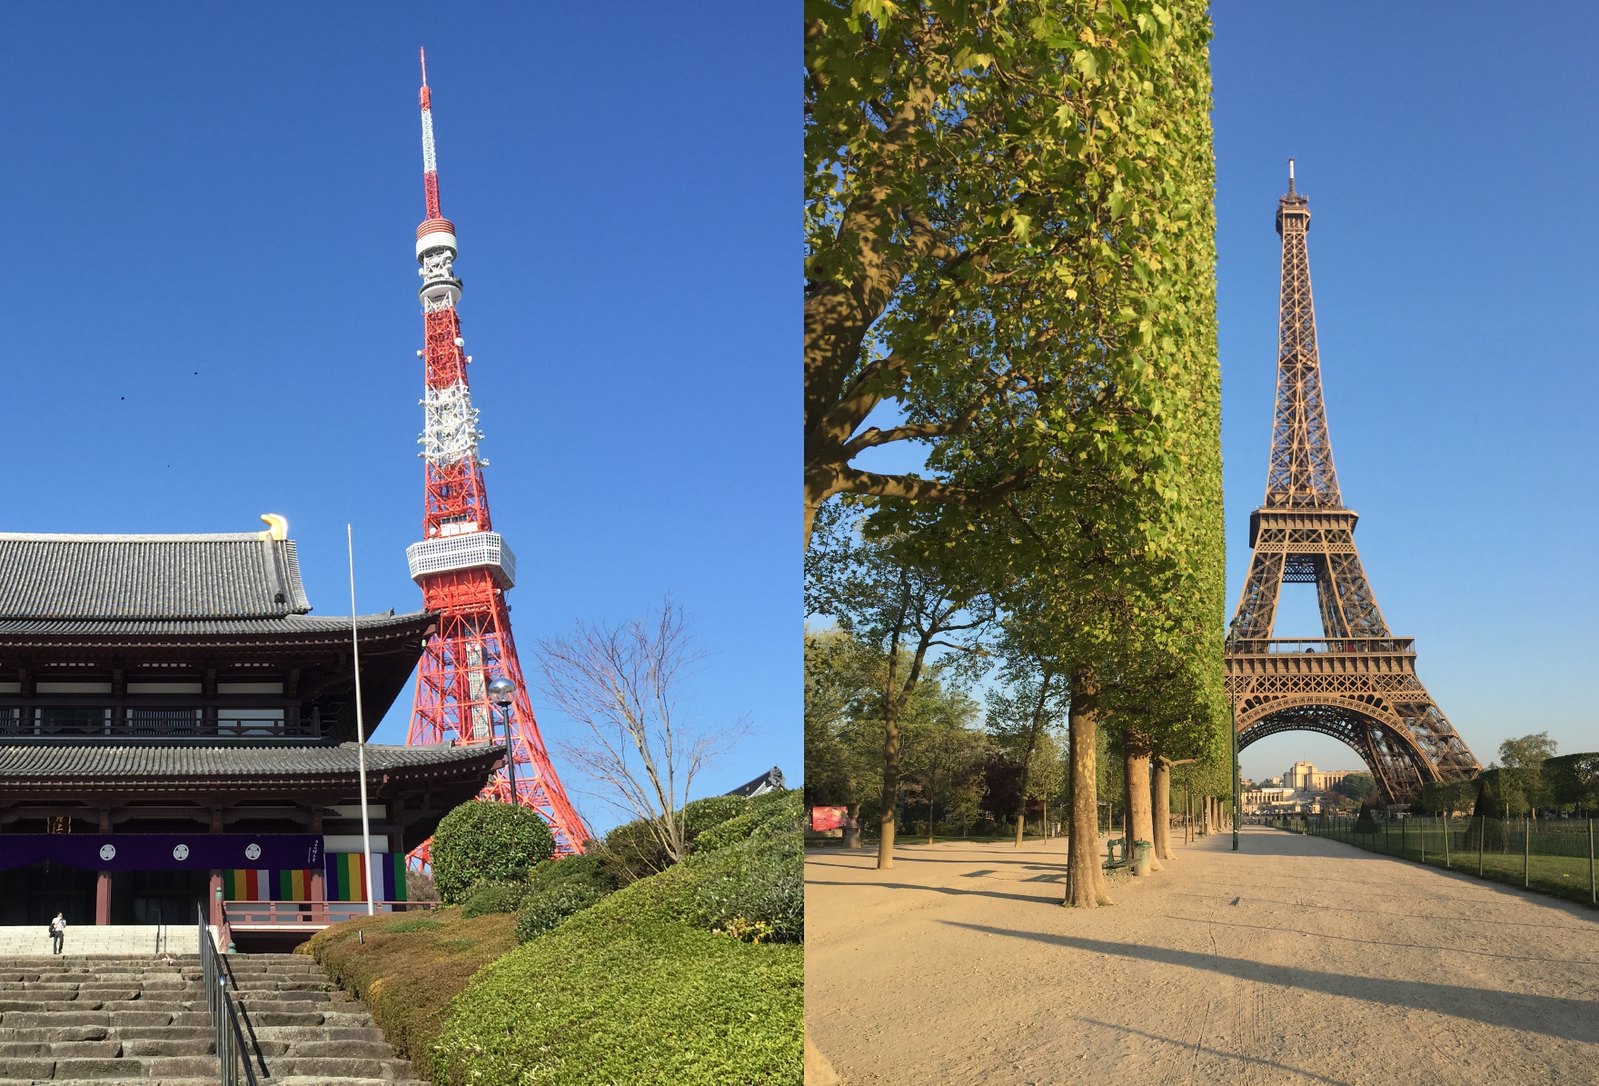 Tokyo Tower and Eiffel Tower in Paris